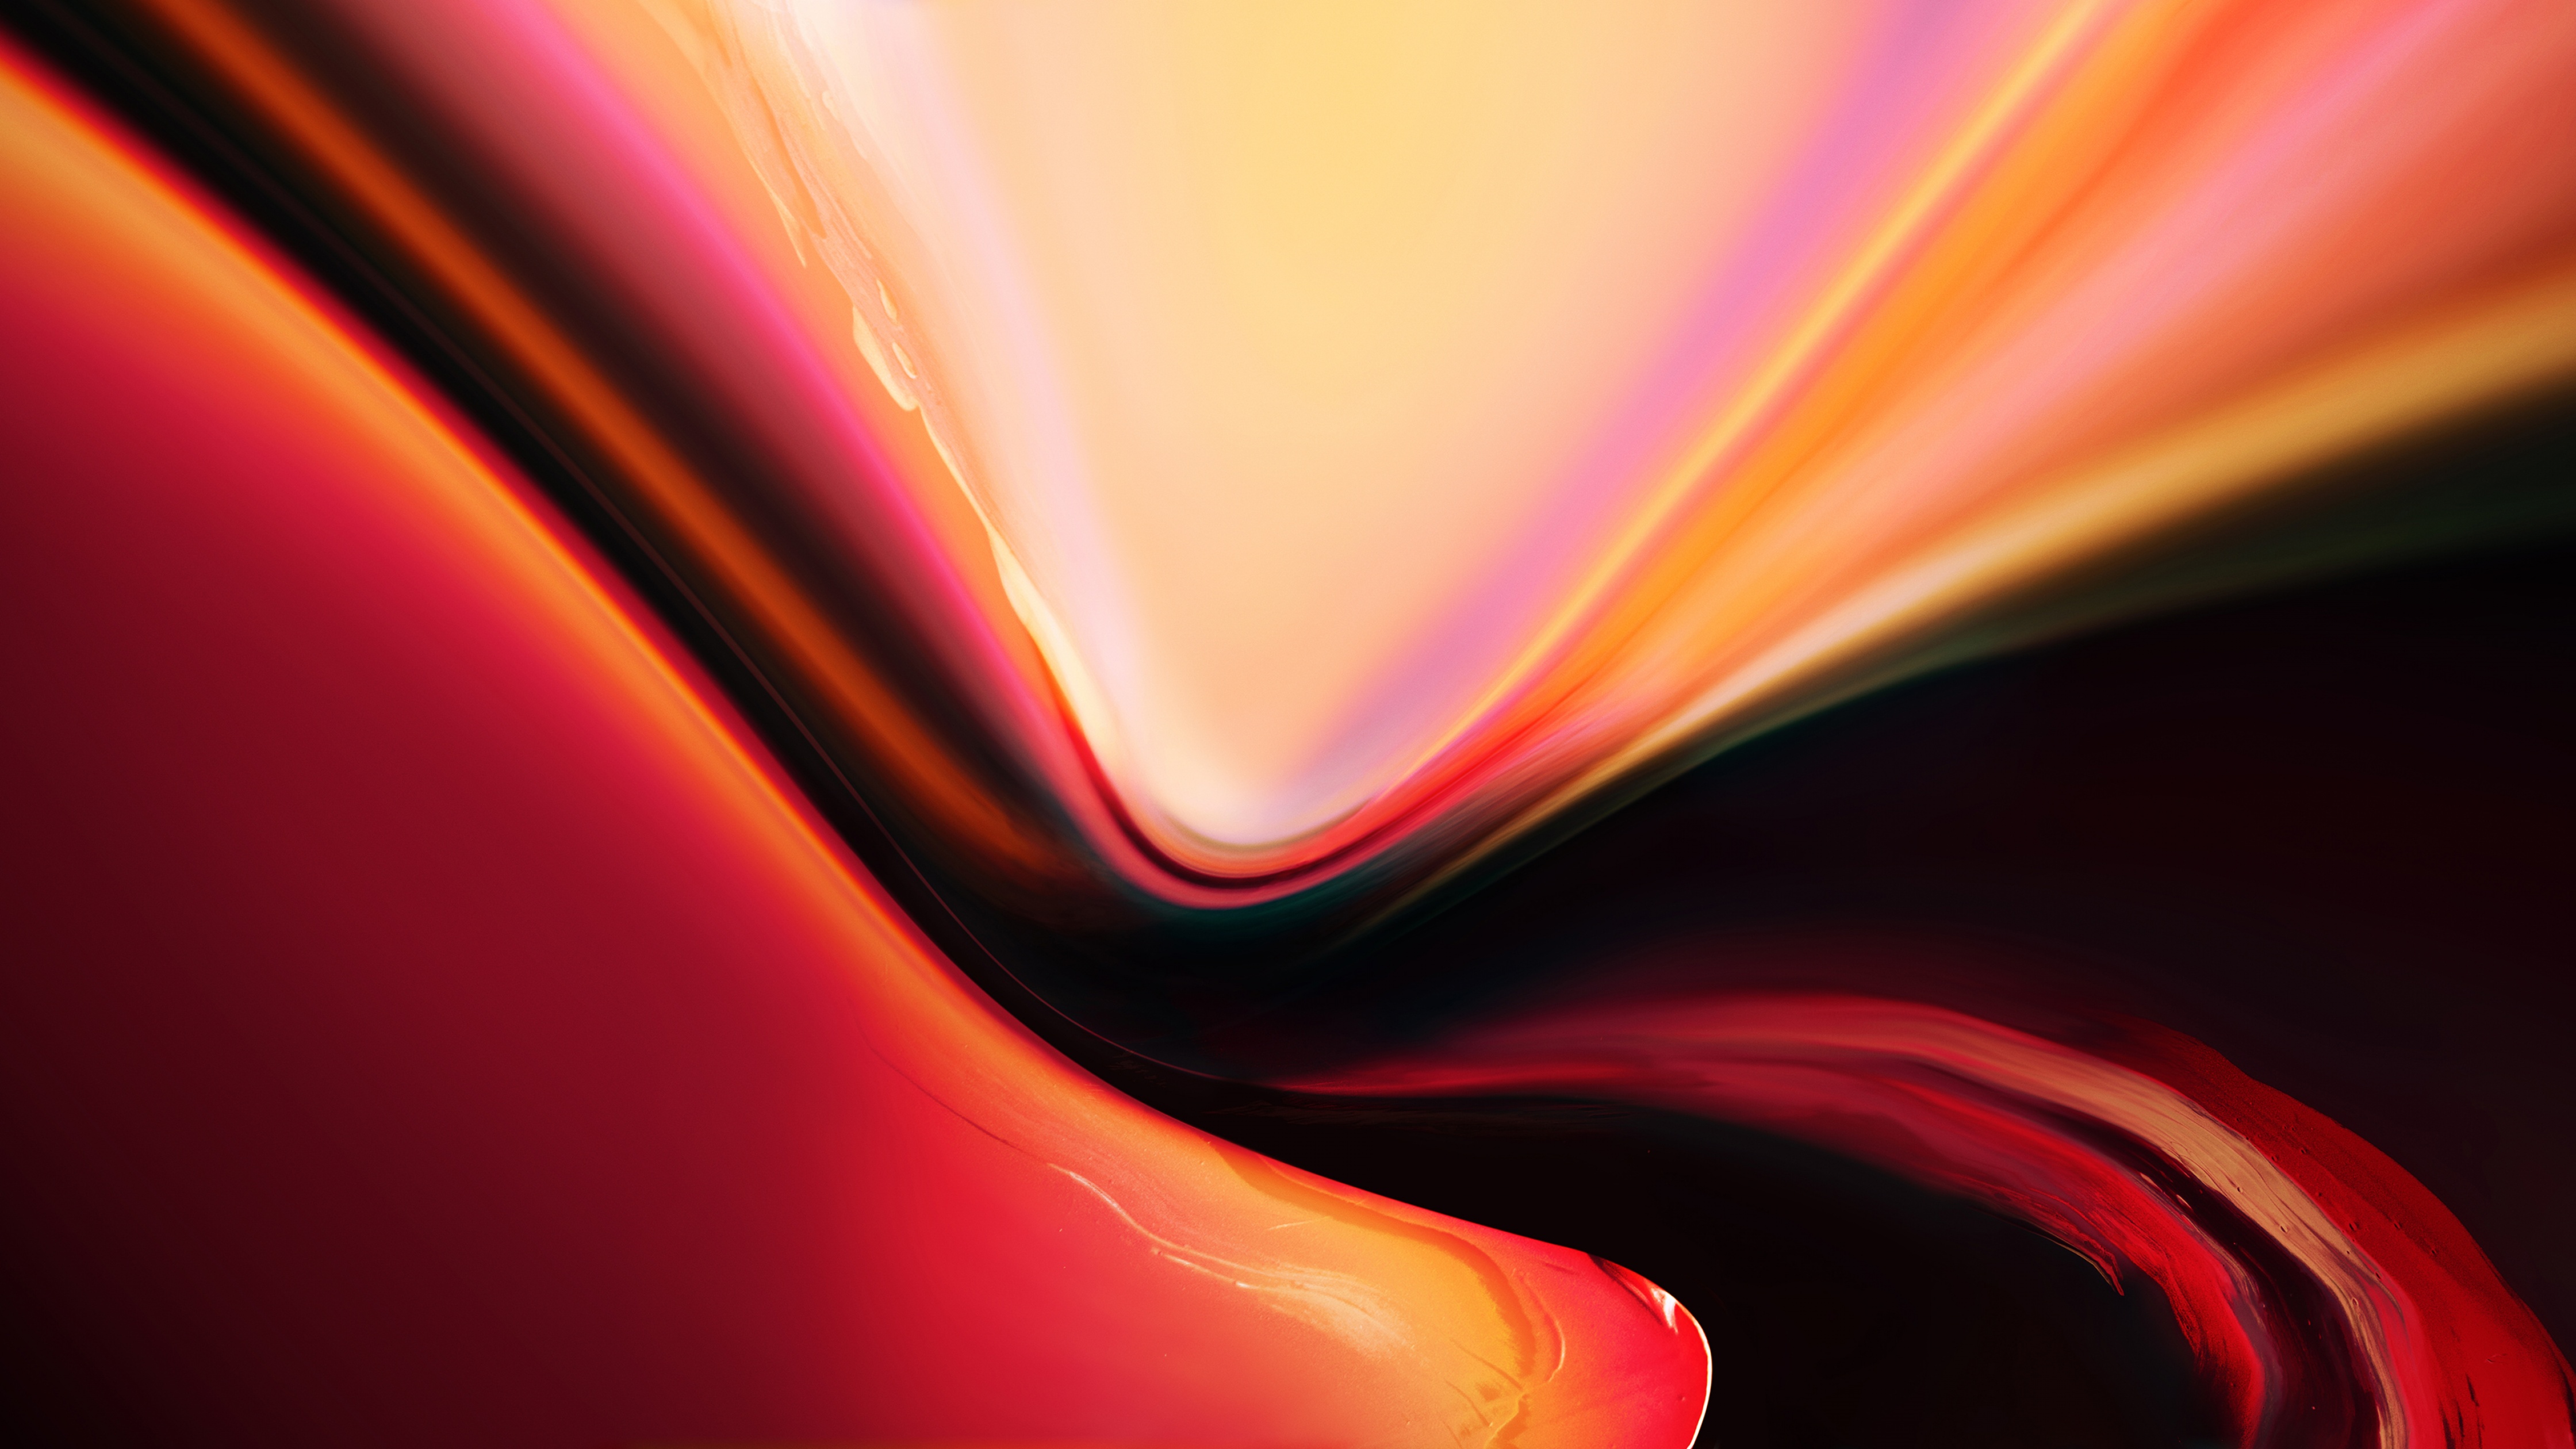 OnePlus Wallpaper 4K, Stock, 7, Abstract, #877